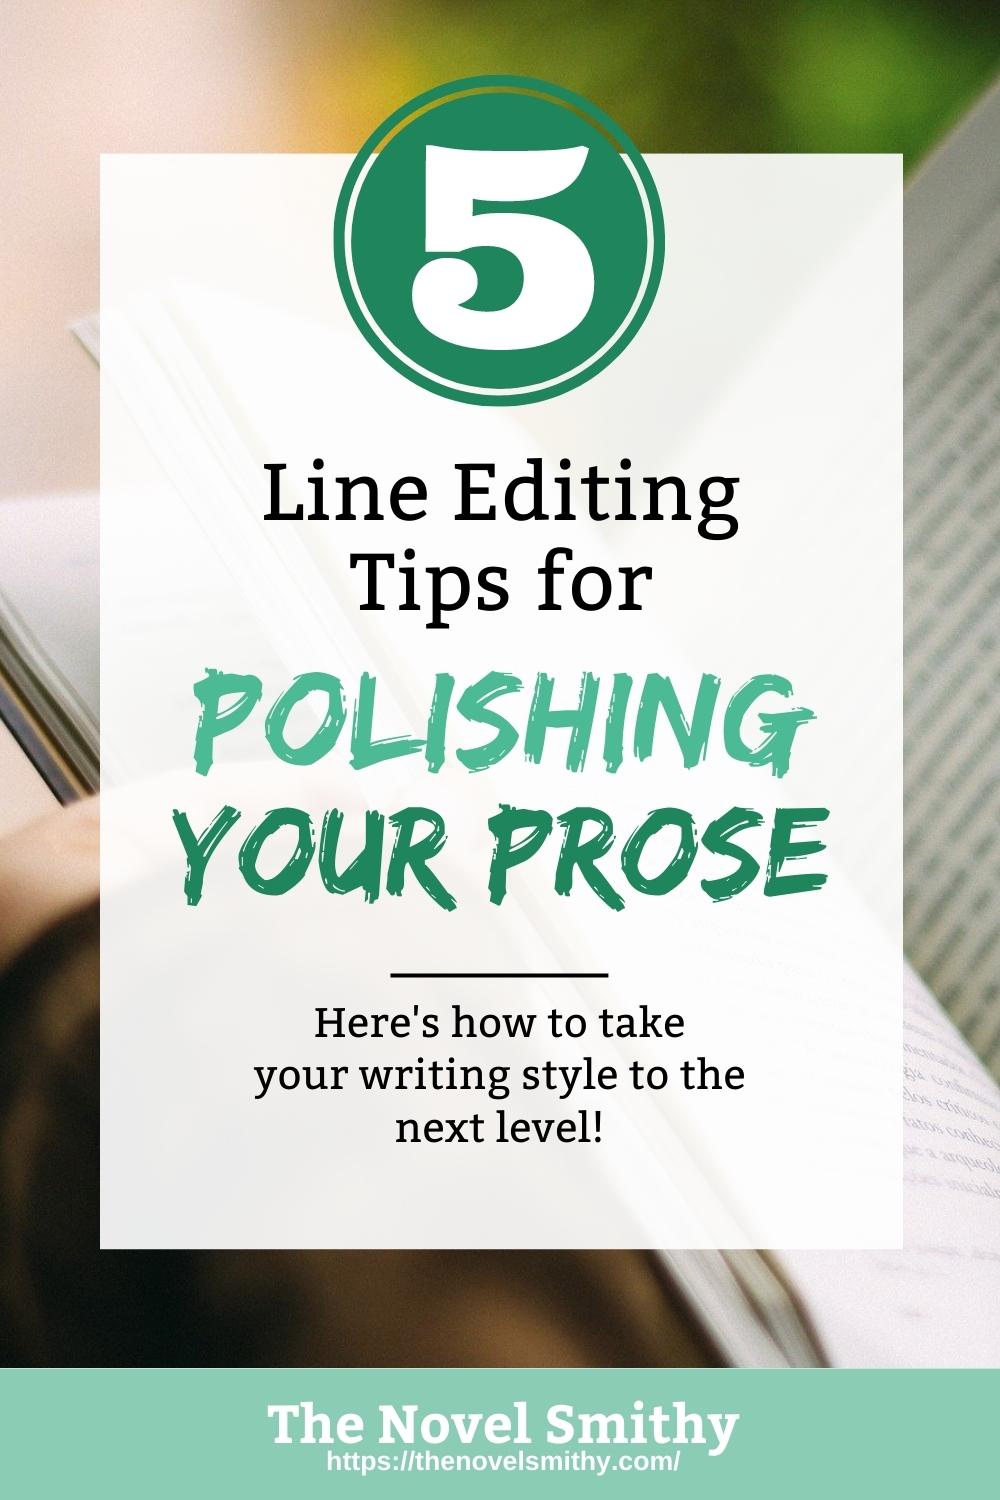 5 Line Editing Tips for Polishing Your Prose